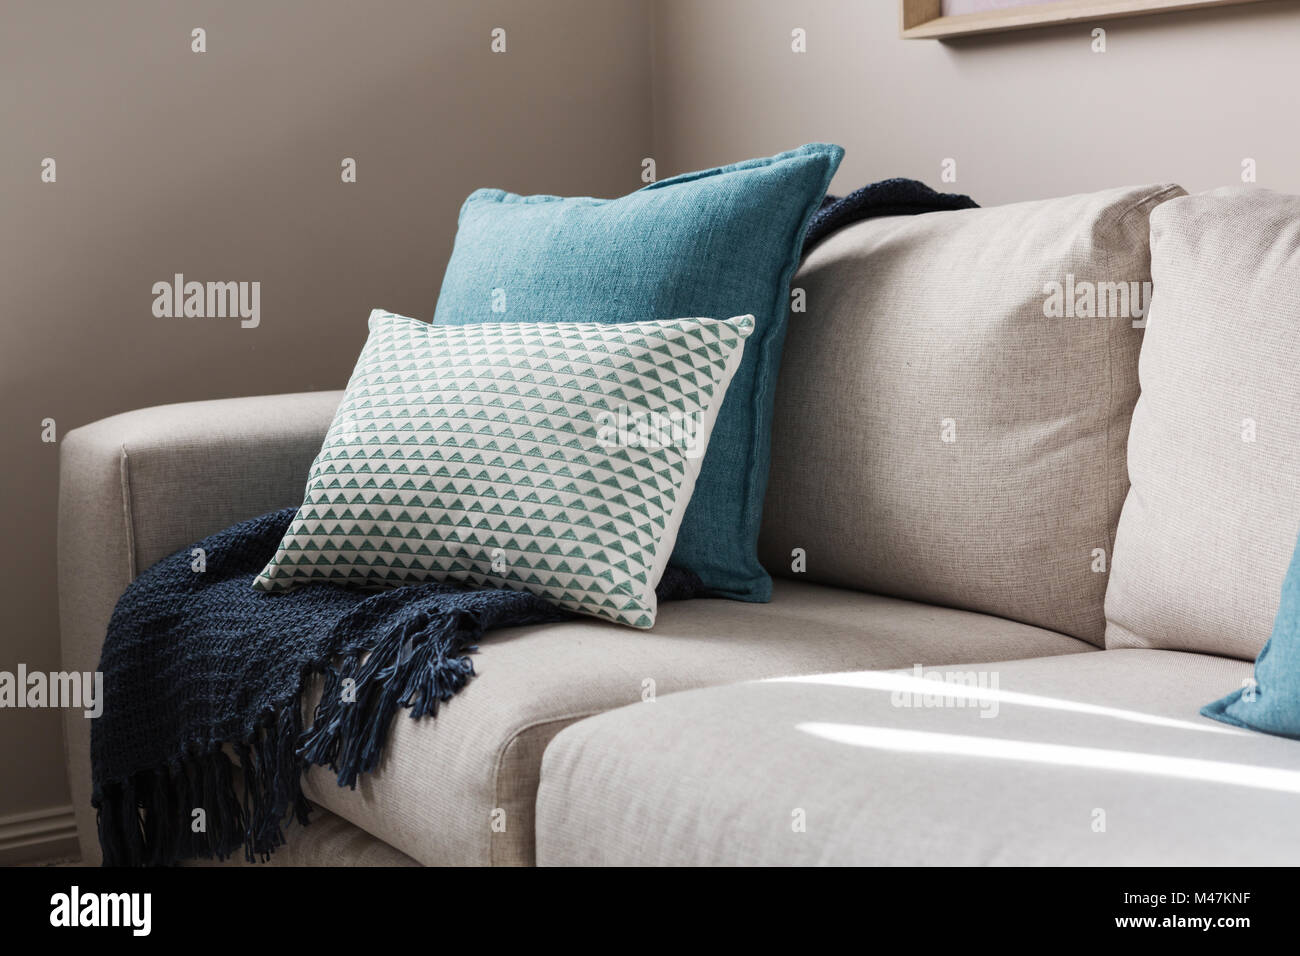 https://c8.alamy.com/comp/M47KNF/close-up-of-a-fabric-sofa-with-styled-cushions-and-throw-M47KNF.jpg